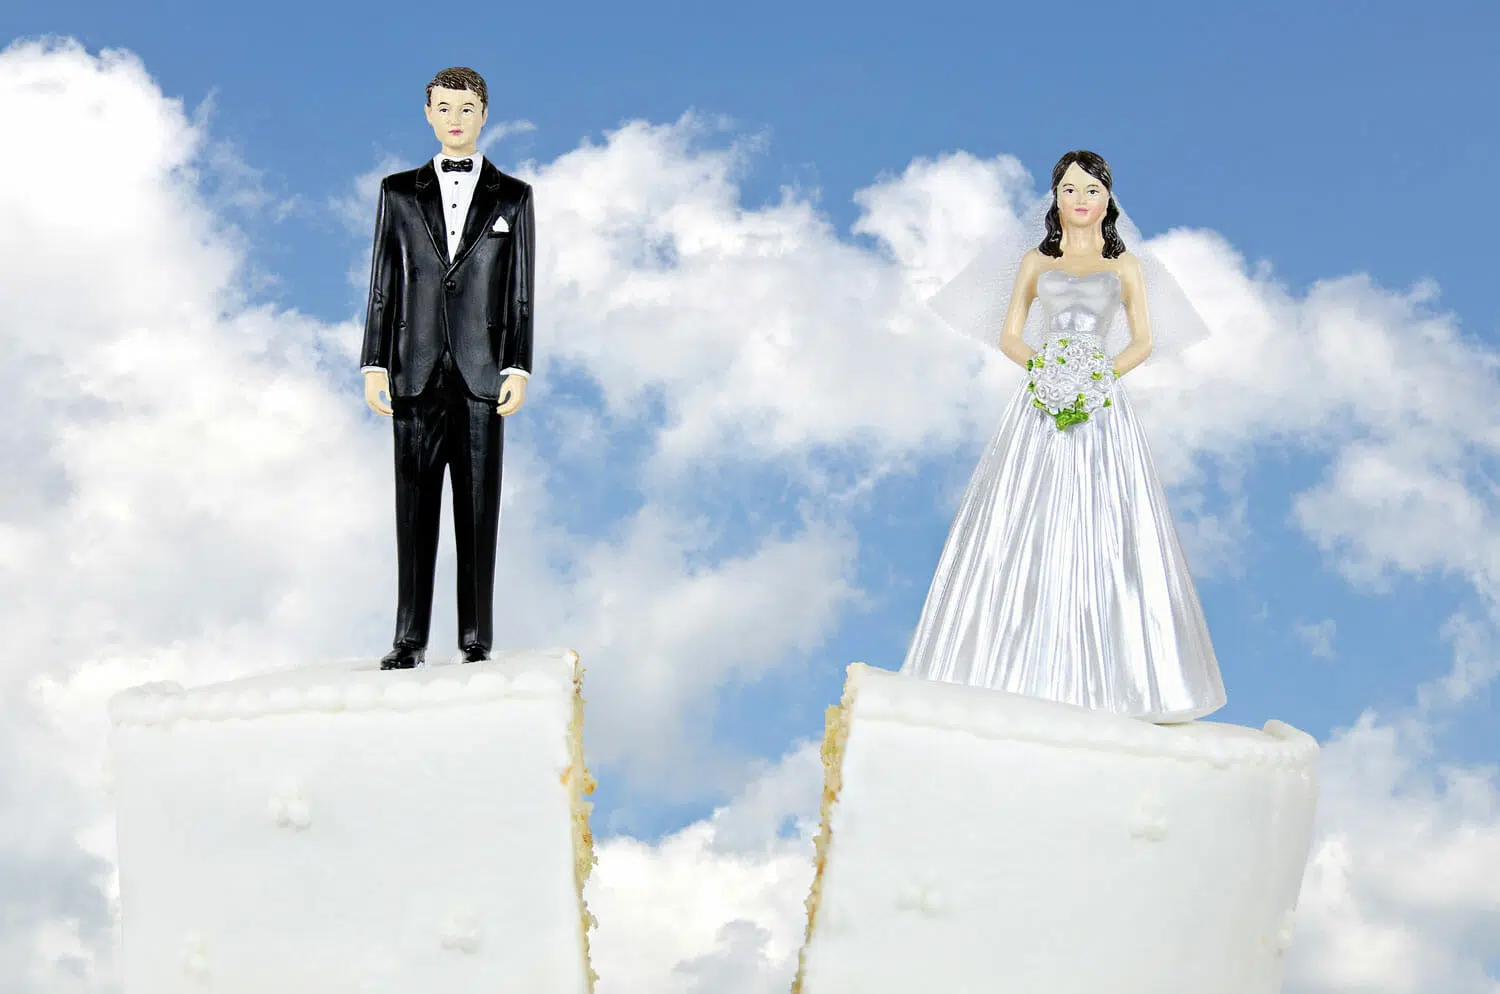 Virginia and fault divorce